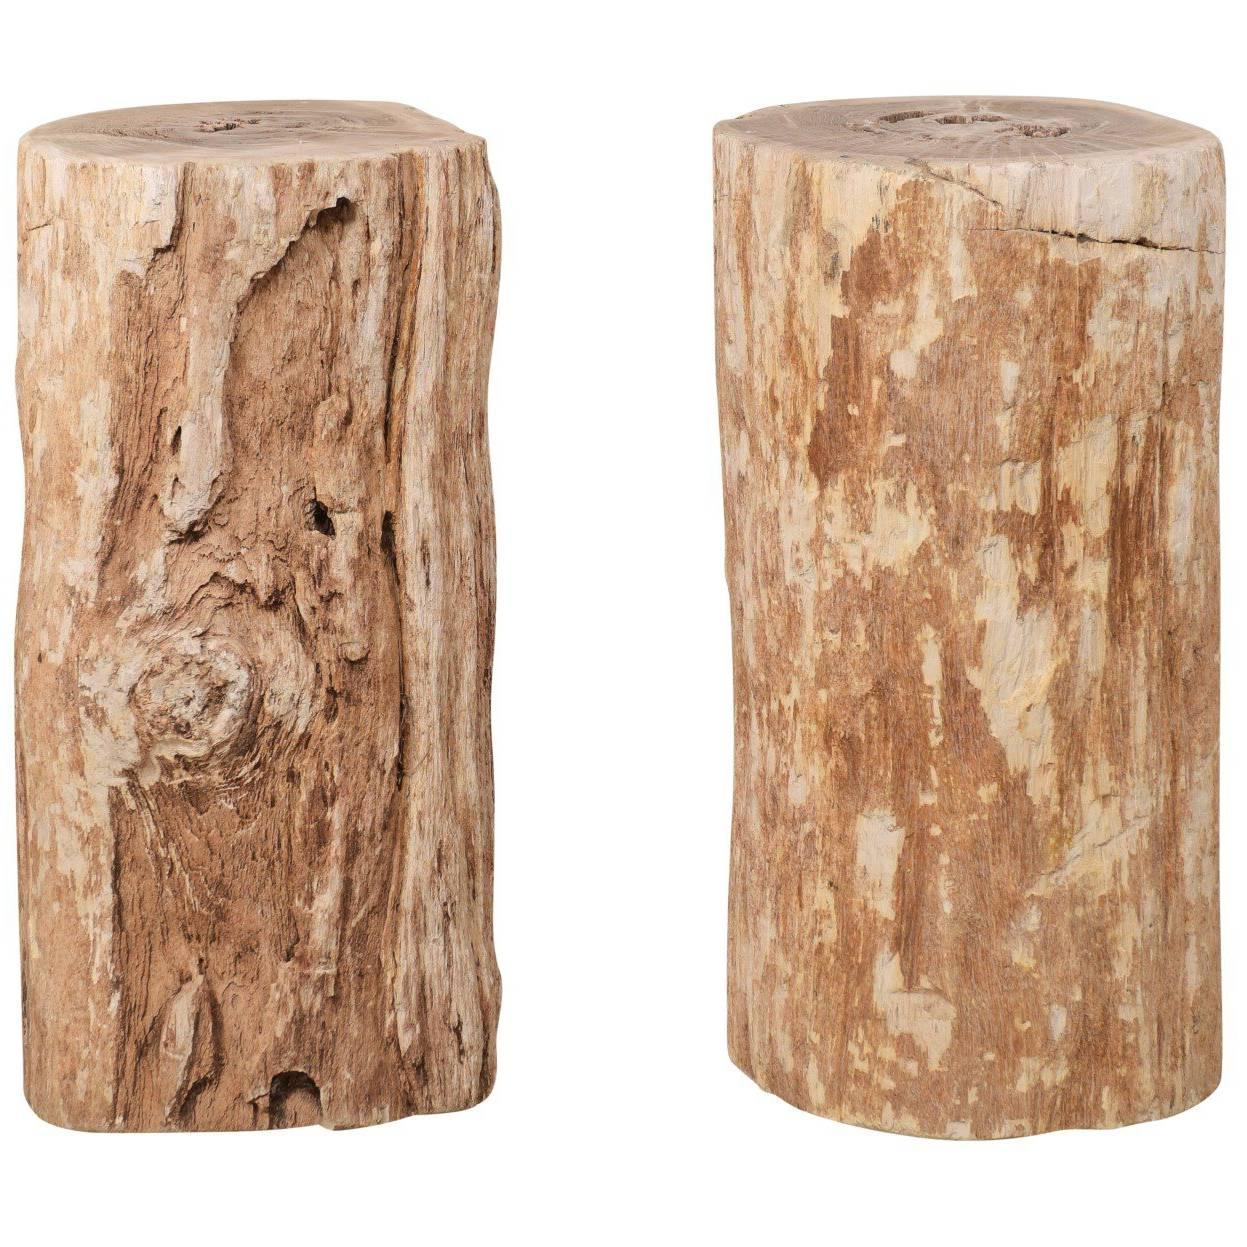 Pair of Petrified Wood Drink Side Tables with Polished Tops